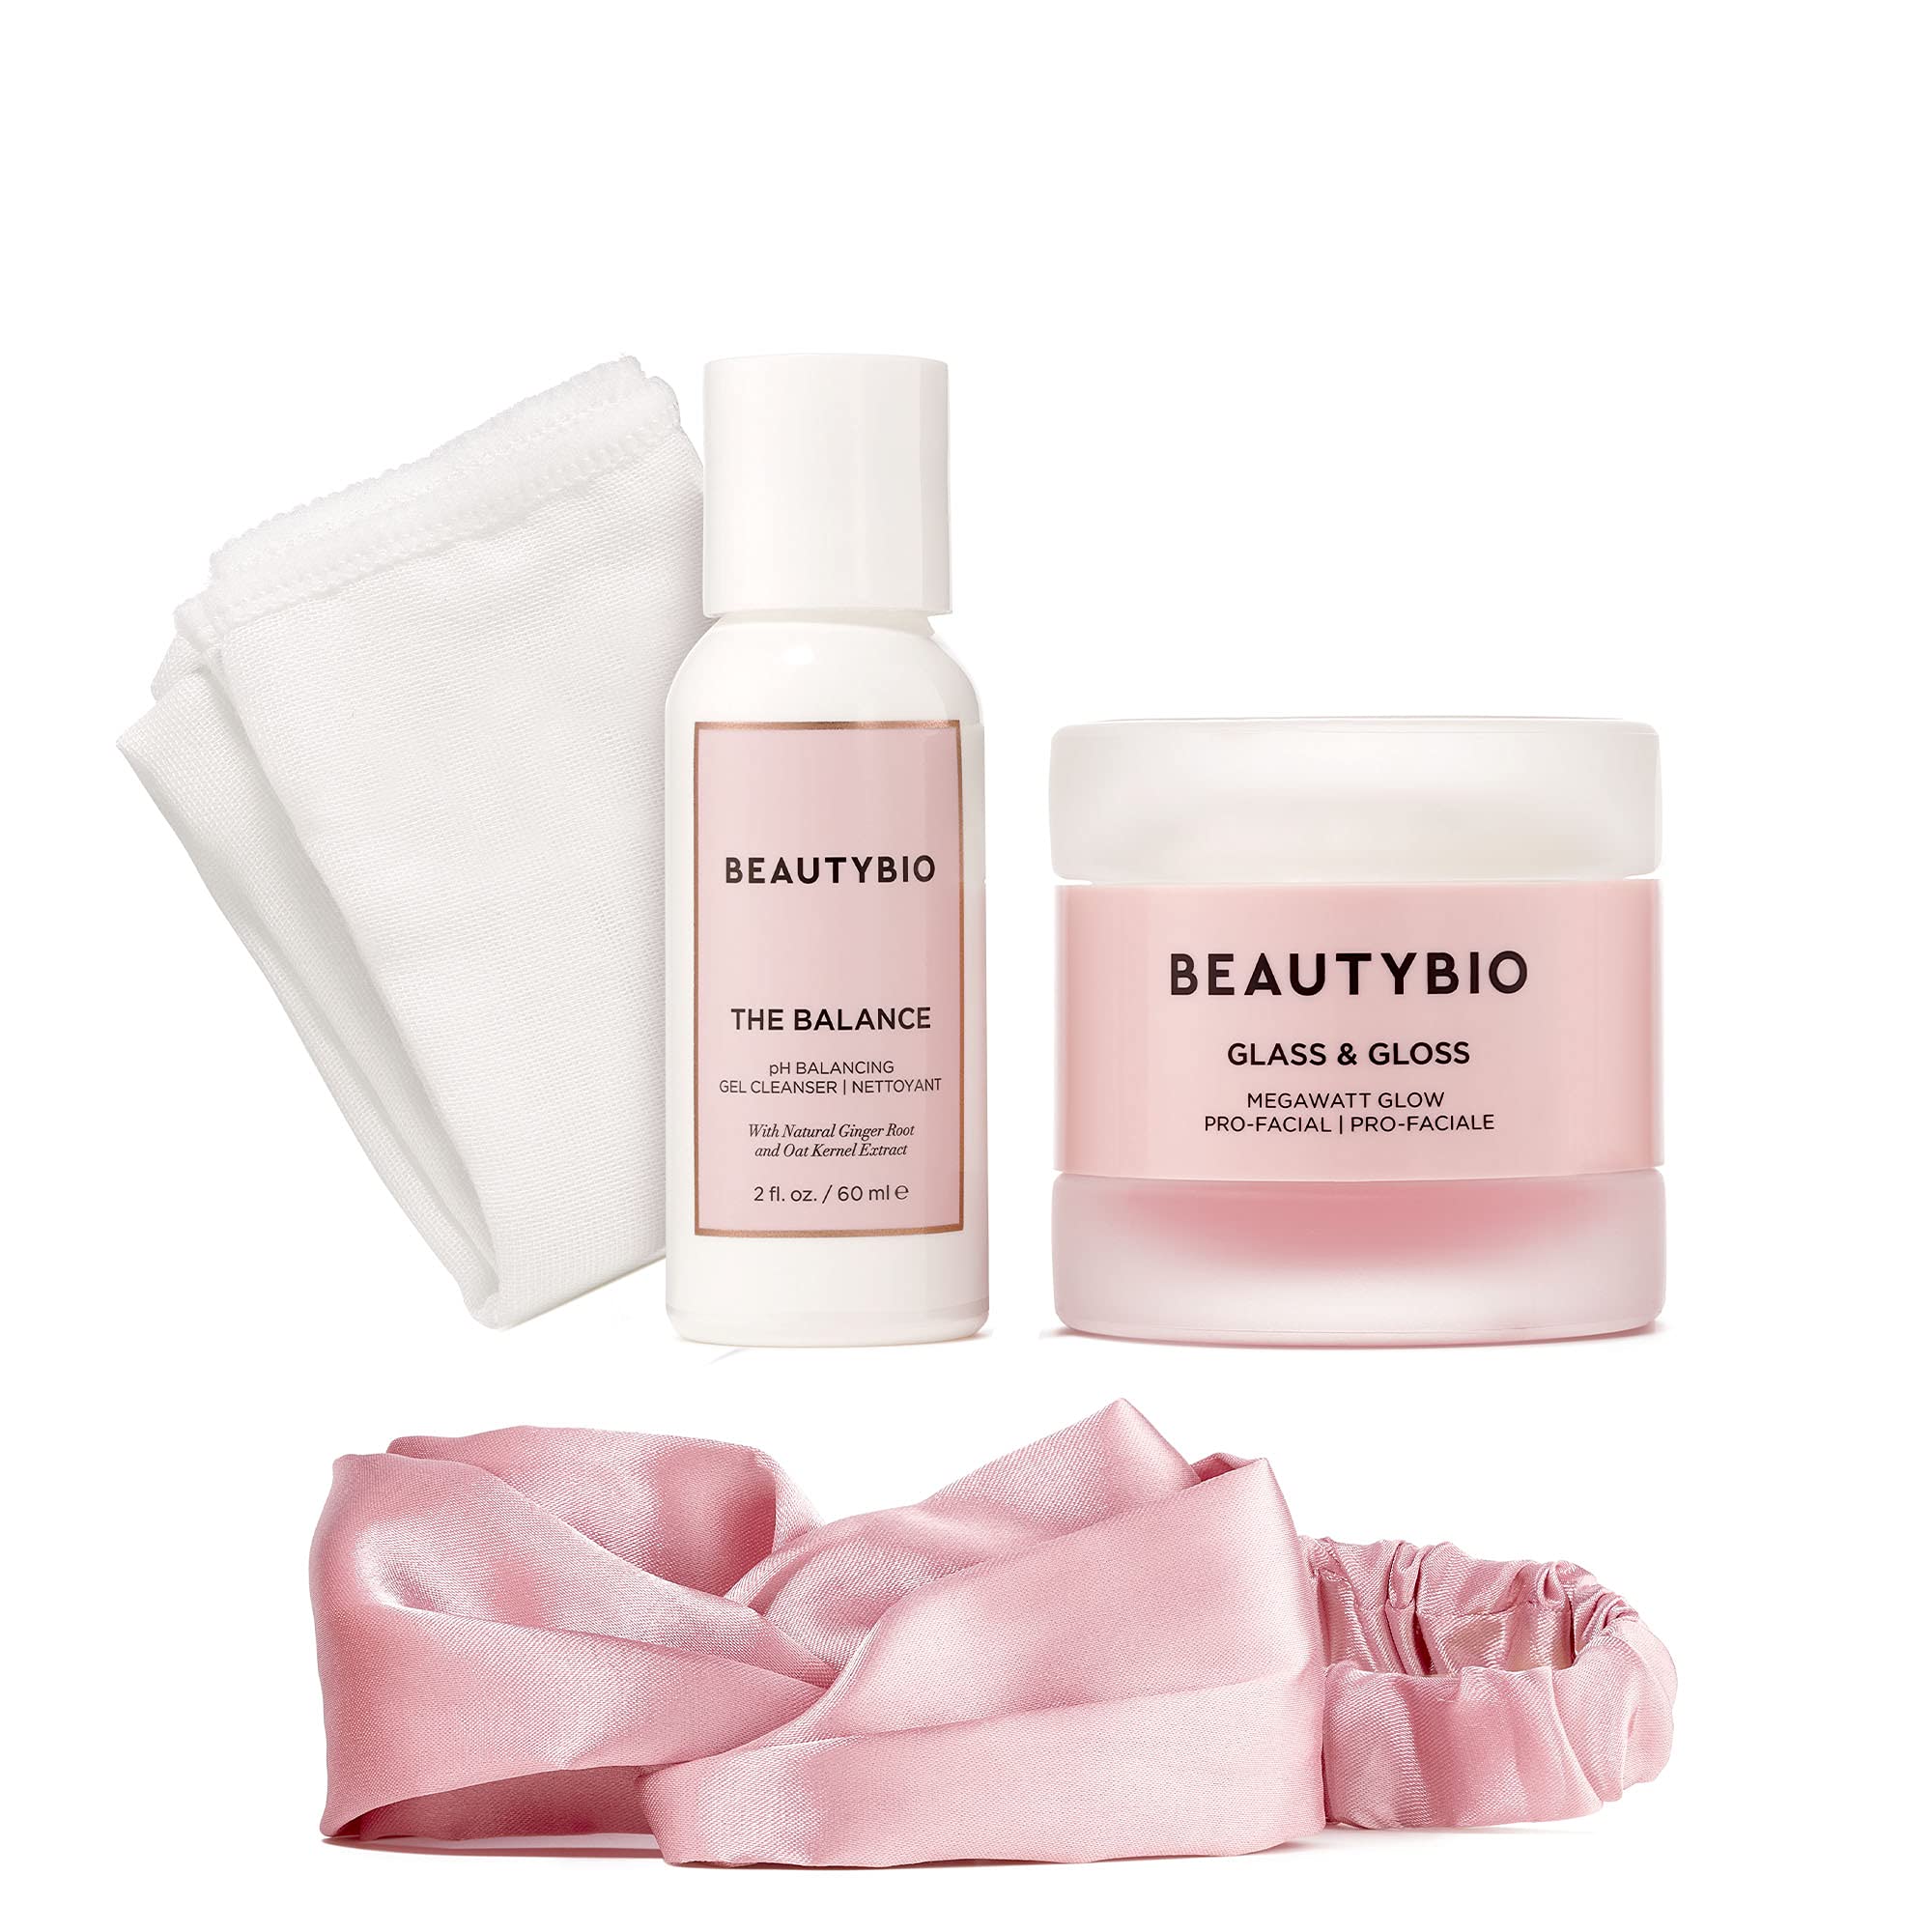 BeautyBio At Home Spa Facial For Glossy Smooth Skin. The Balance, Glass and Gloss, Exfoliating Cloth and Headband, 1 ct.